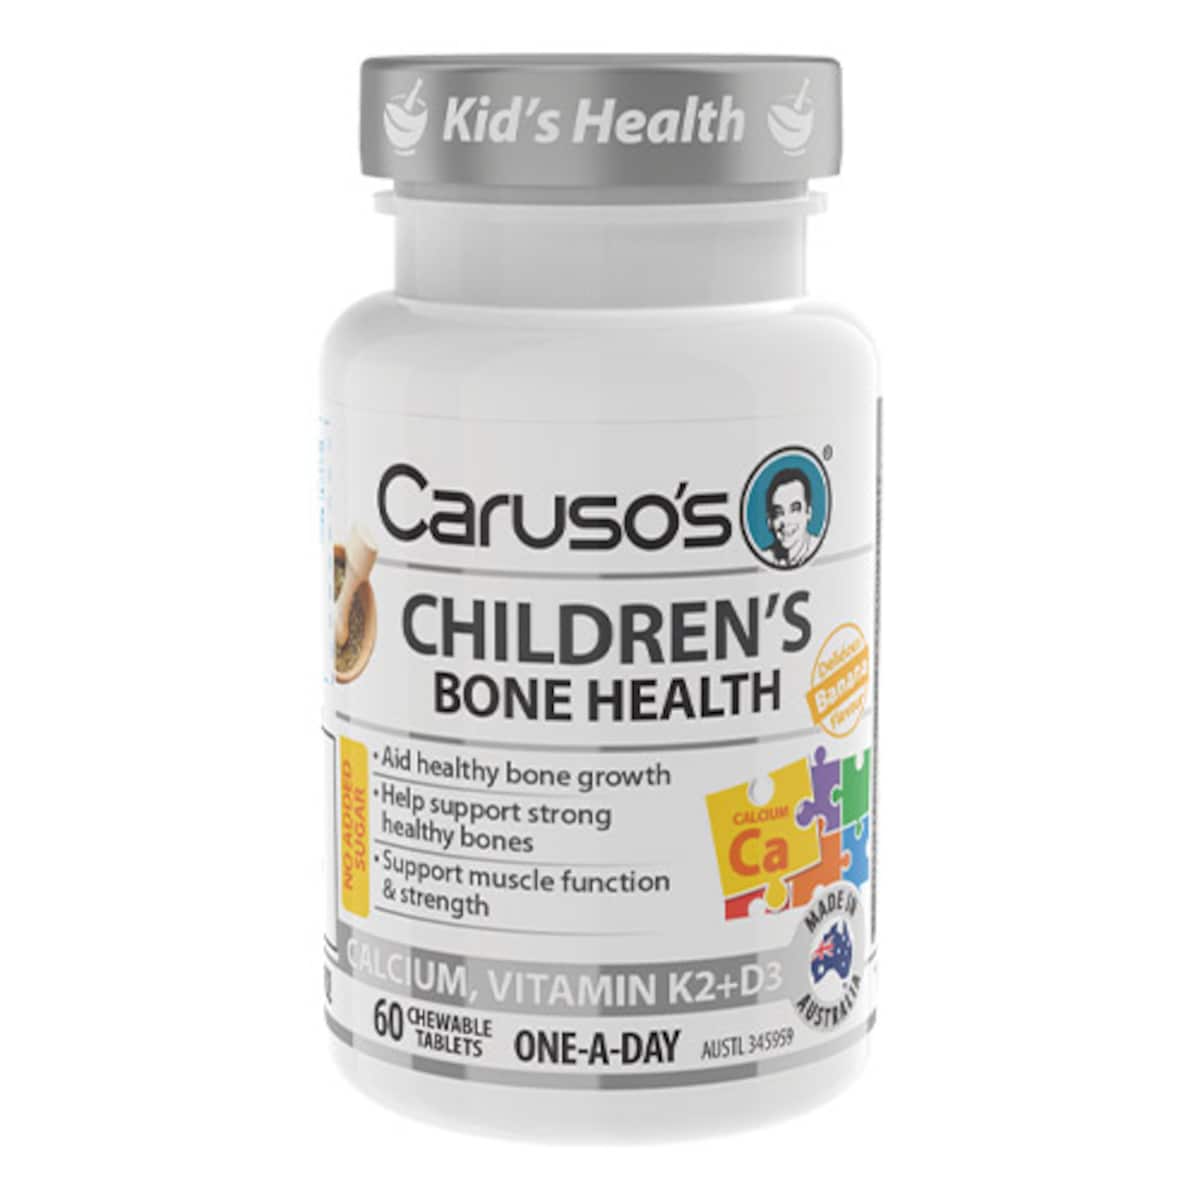 Carusos Childrens Bone Health 60 Chewable Tablets